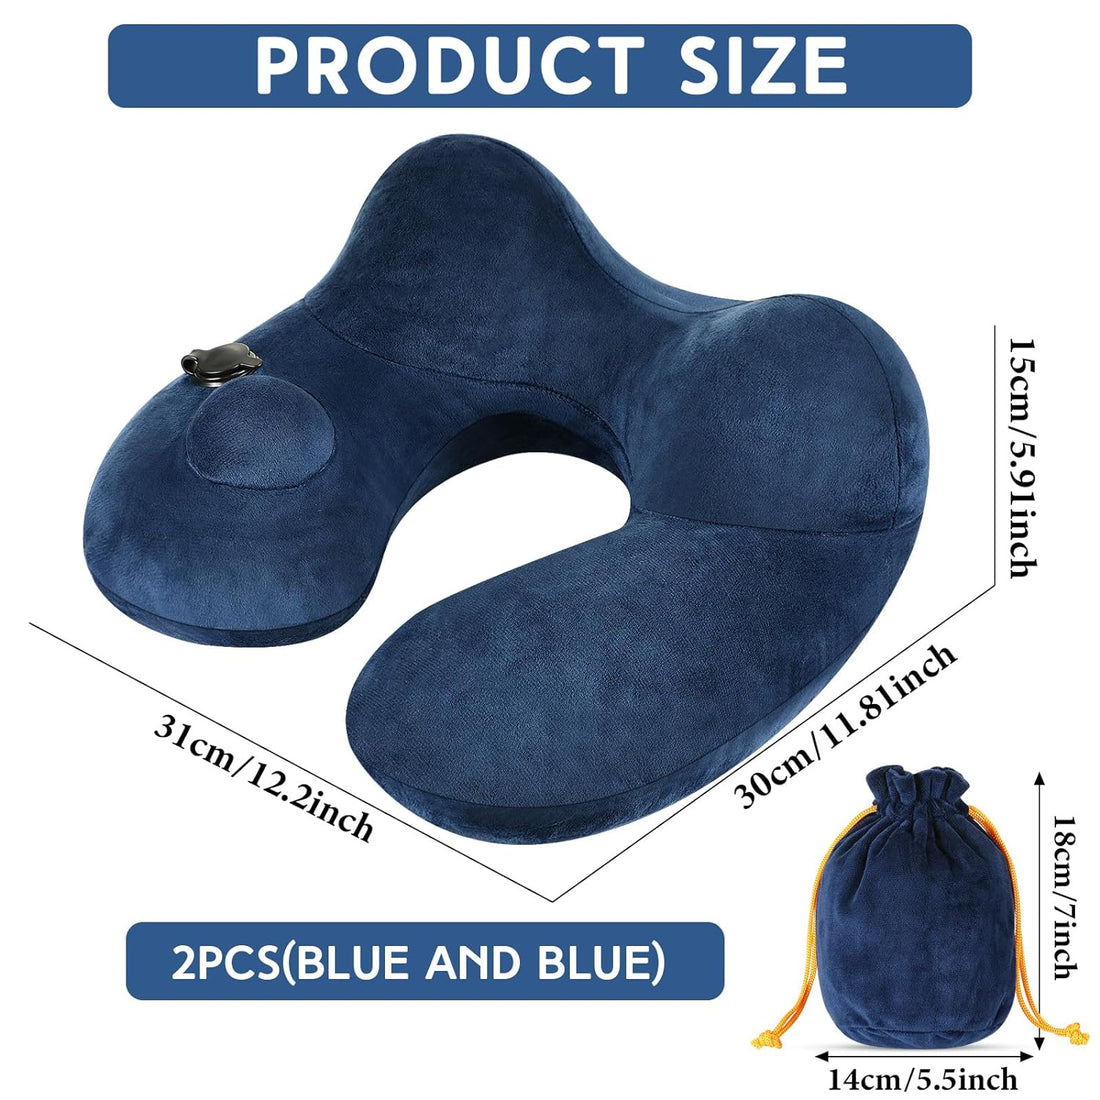 Xtinmee 2Pcs Self-Inflatable Pillow Inflatable Travel Pillow with Compact Bag Soft Airplane Pillow for Long Flight Neck Cushion for Head Support Car Home Office 12.2x11.81x5.91in (Navy Blue)